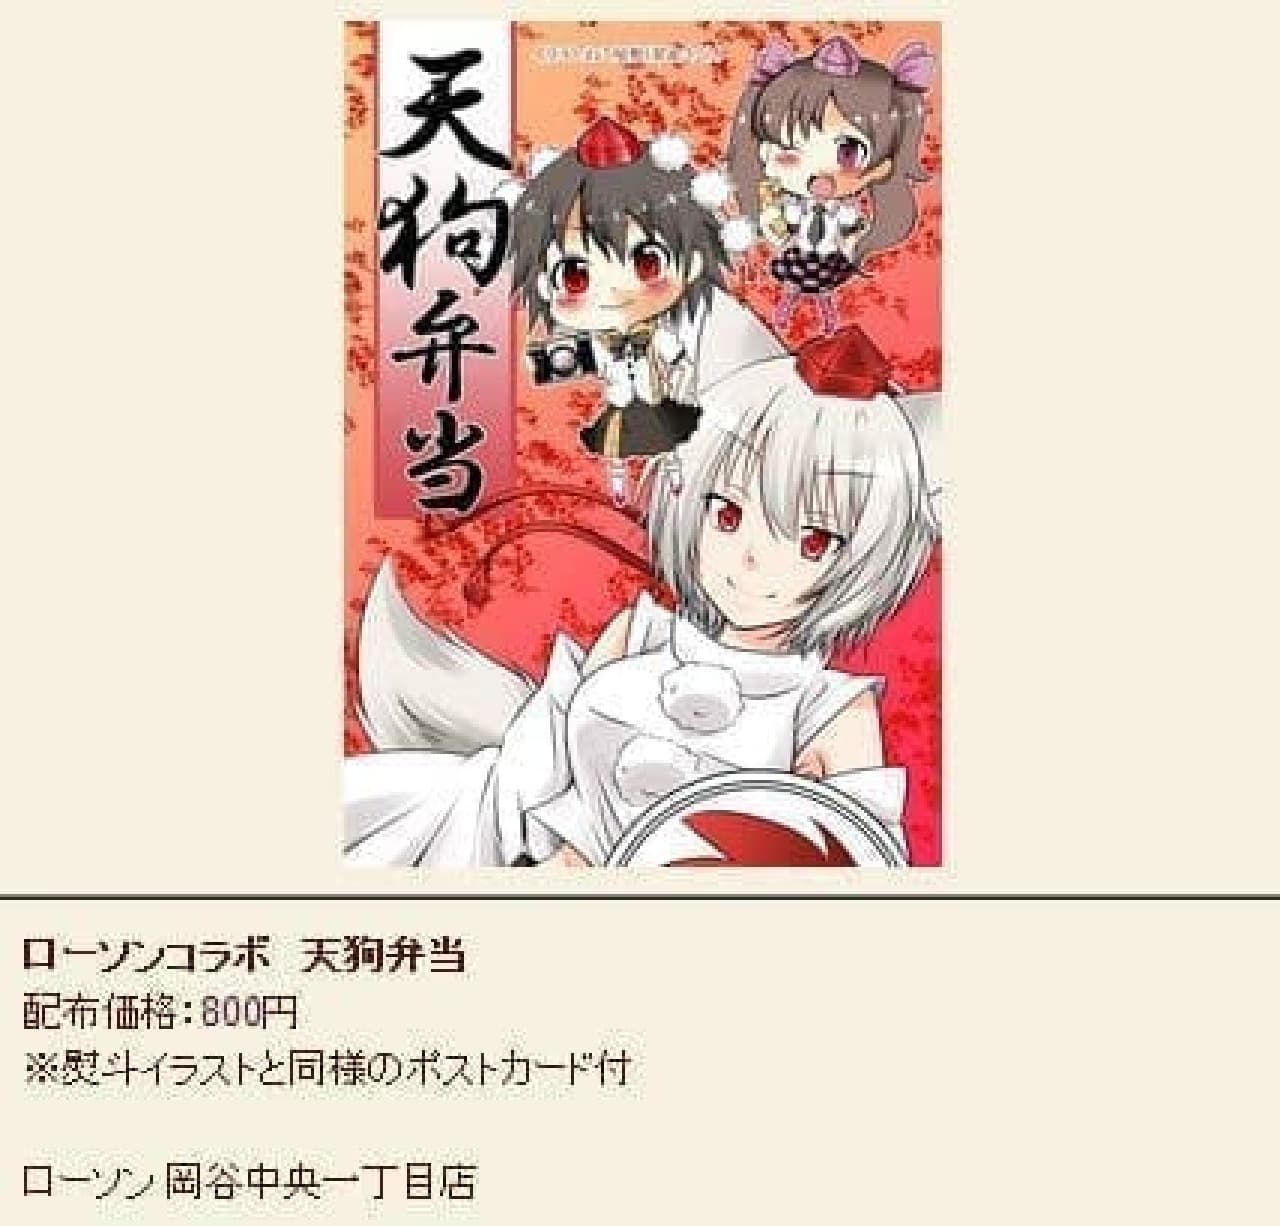 Package illustration of "Lawson collaboration Tengu bento" sold at the event [Source: Mishaguji priest management announcement site]